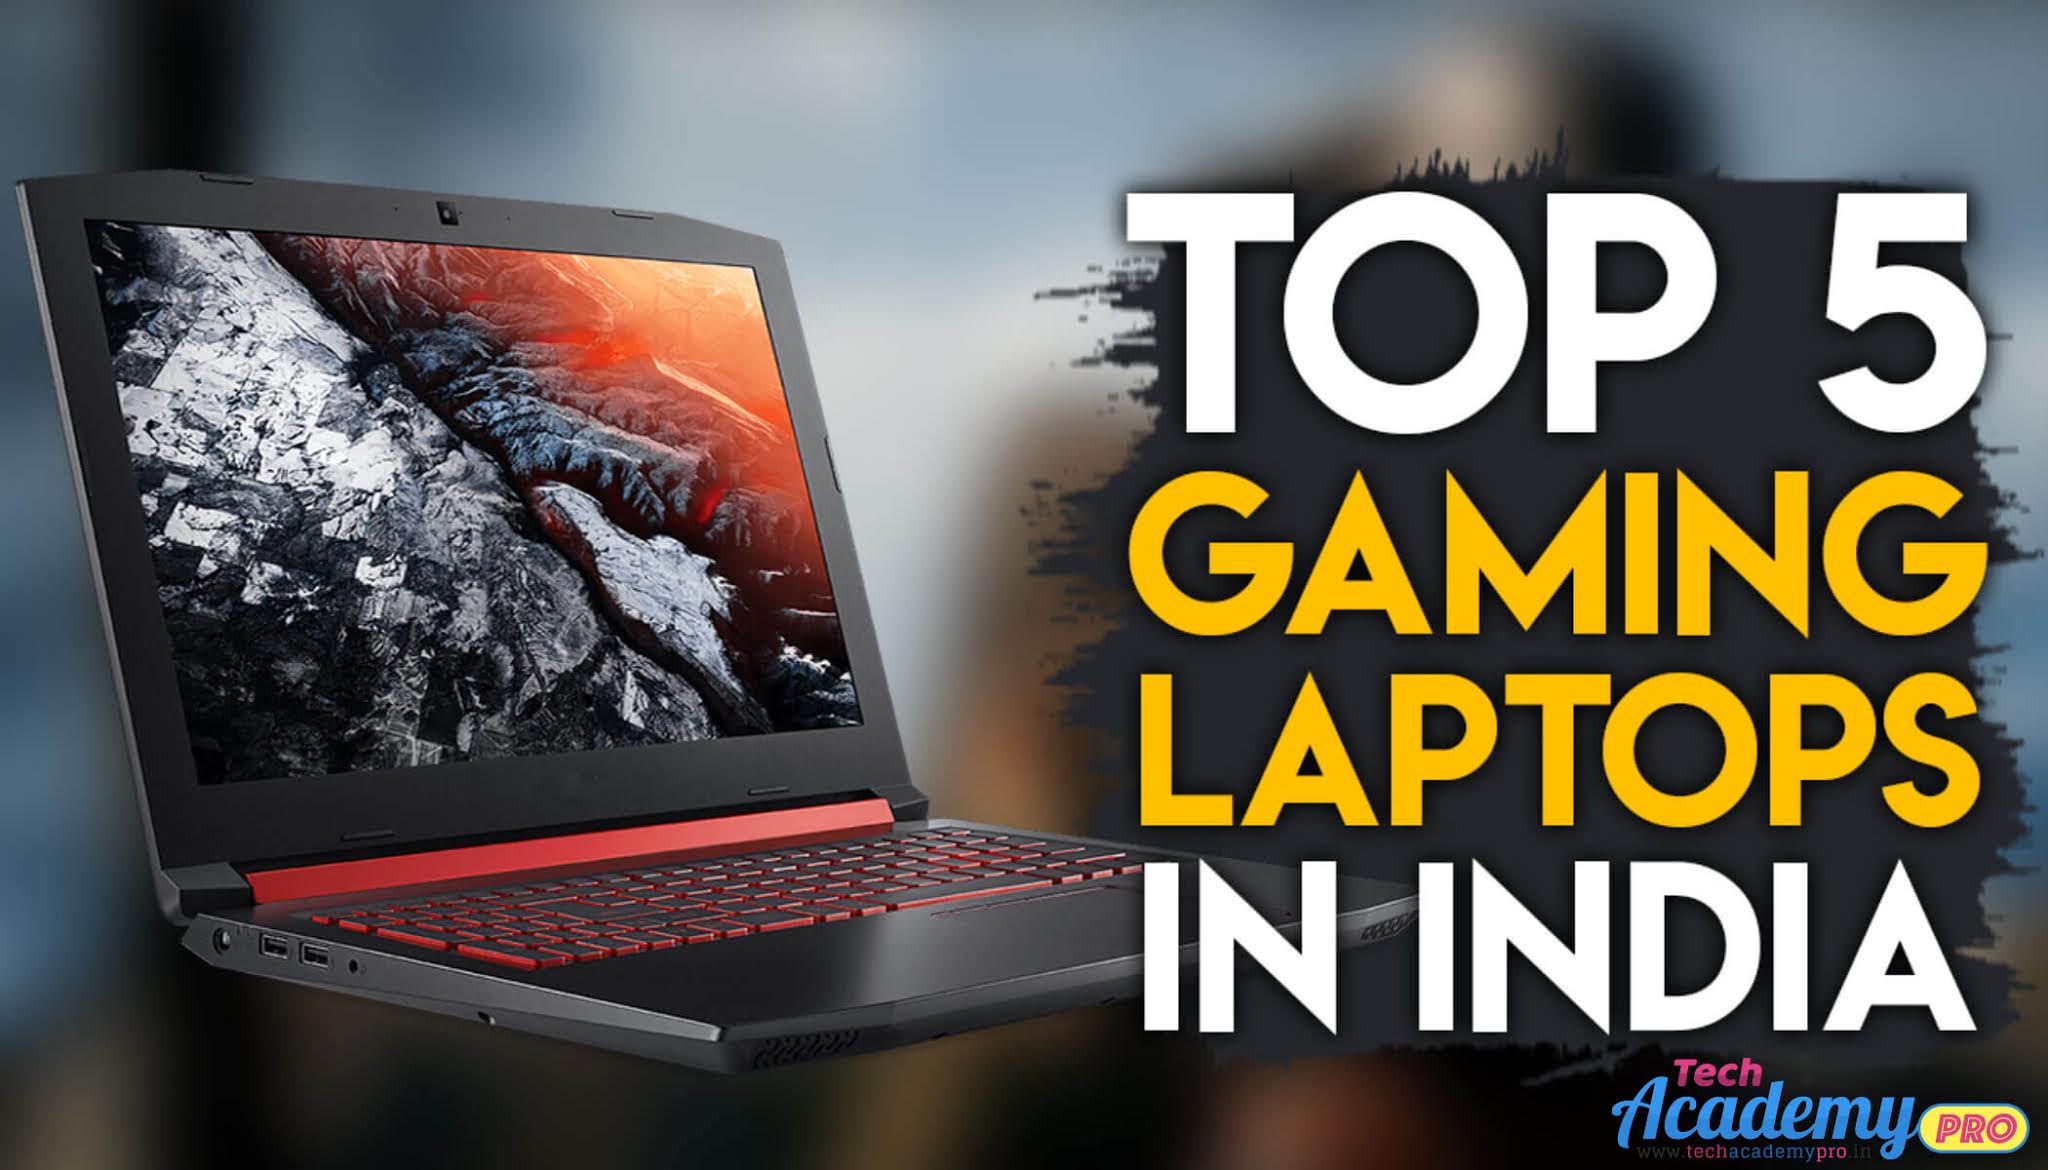 Top 5 Gaming Laptop Under Rs 50000 - Know in Hindi